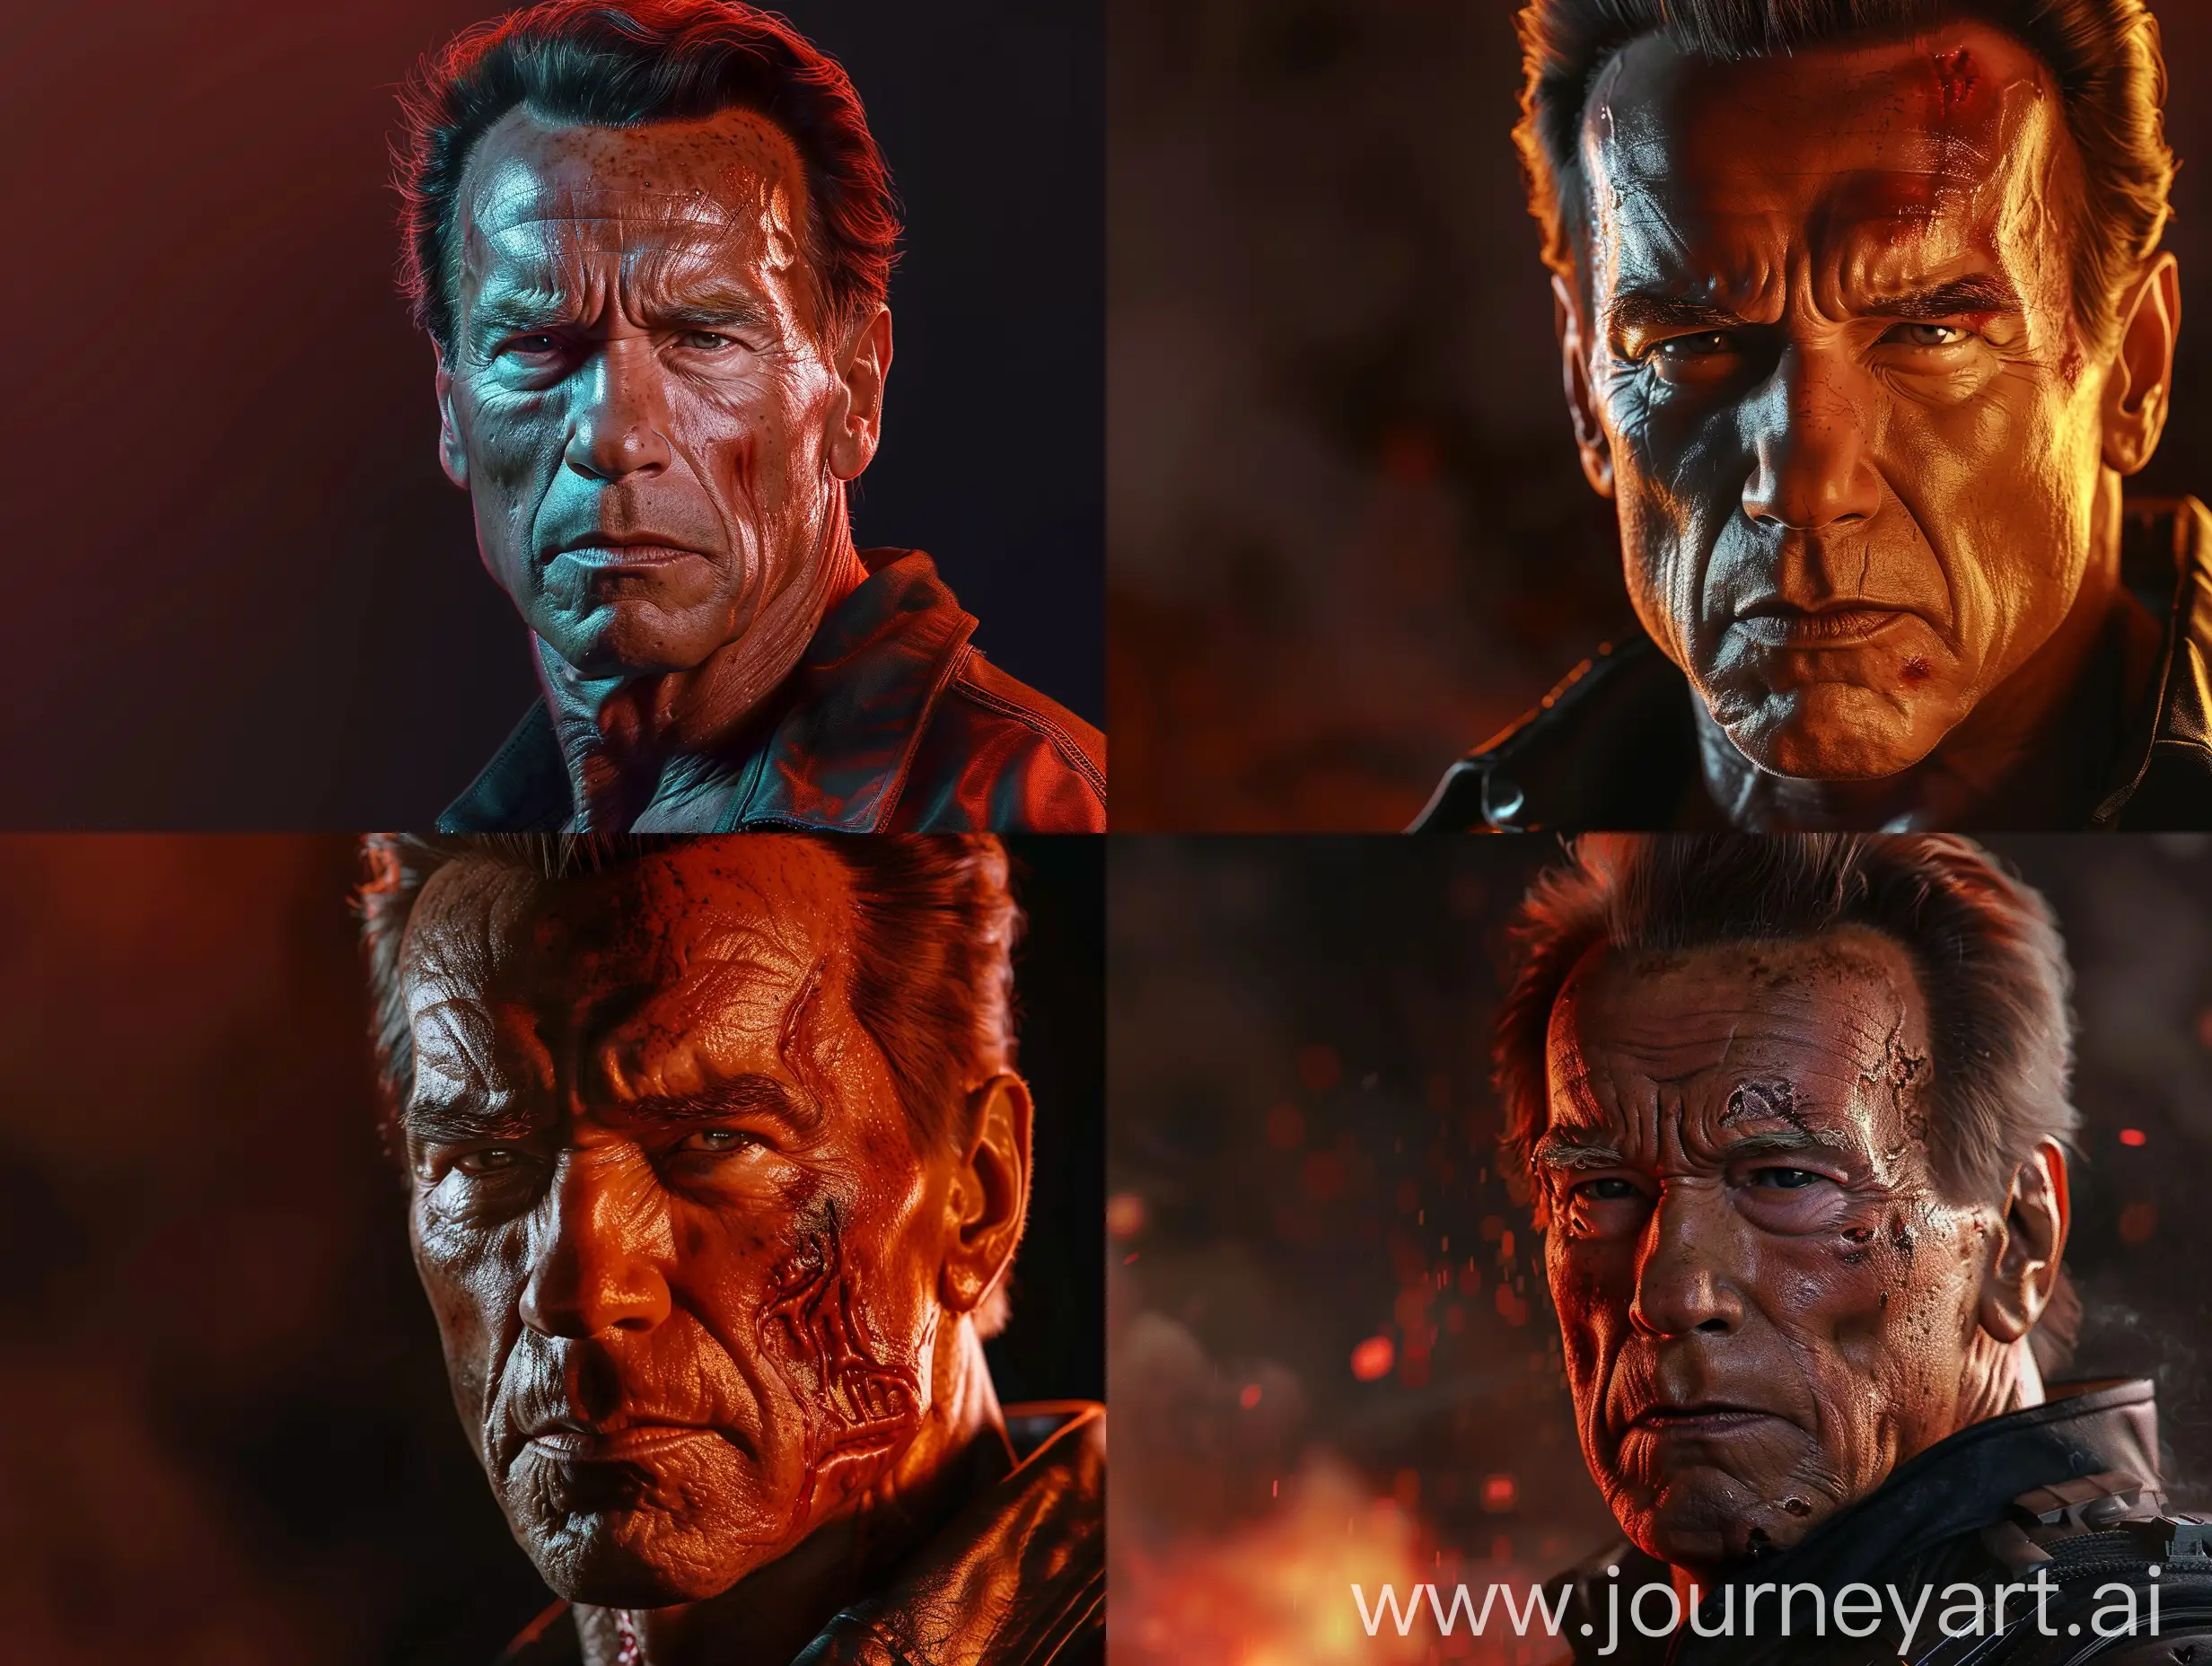 A detailed, realistic portrait of Arnold Schwarzenegger in half-body pose, turned slightly to the left. He has a villainous expression with a devilish look in his eyes. The lighting is high contrast, with a reddish color tone creating a foreboding atmosphere. Wrinkles and skin texture are highly detailed to portray his age and experience. Include a subtle hint of a costume element from one of his iconic villainous roles. Focus on Arnold's face and upper body. Background should be dark and out of focus. No text overlay.
